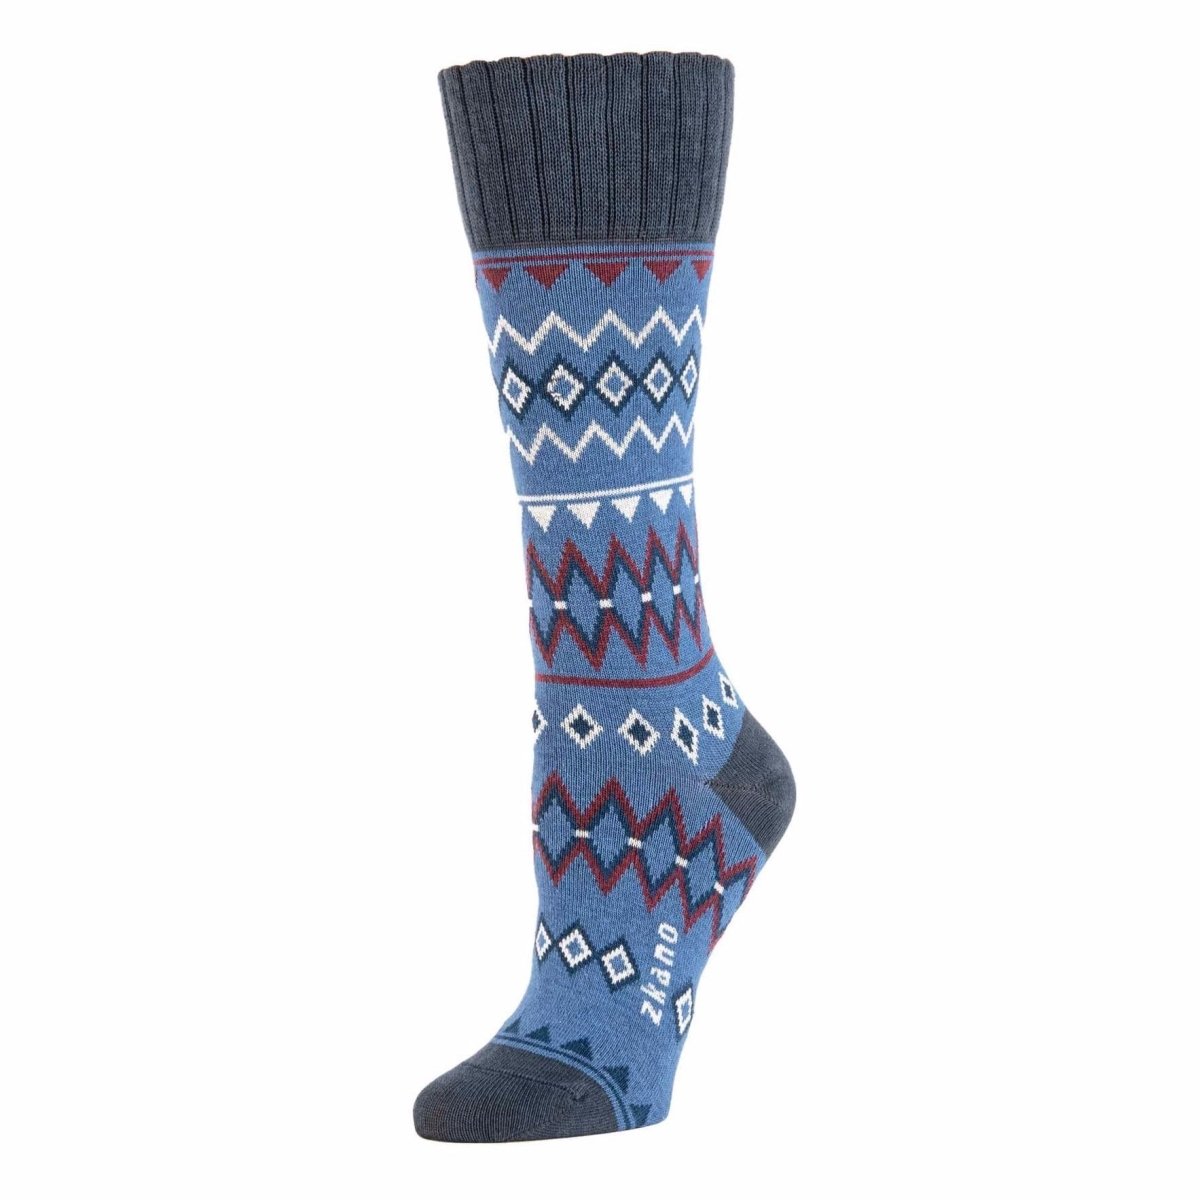 Sky blue sock with white, red and navy blue criss-cross pattern. Heel, toe and ribbed collar are a dark blue. The Winter Faire Isle Sock in Cornflower is from Zkano and made in Alabama, USA.